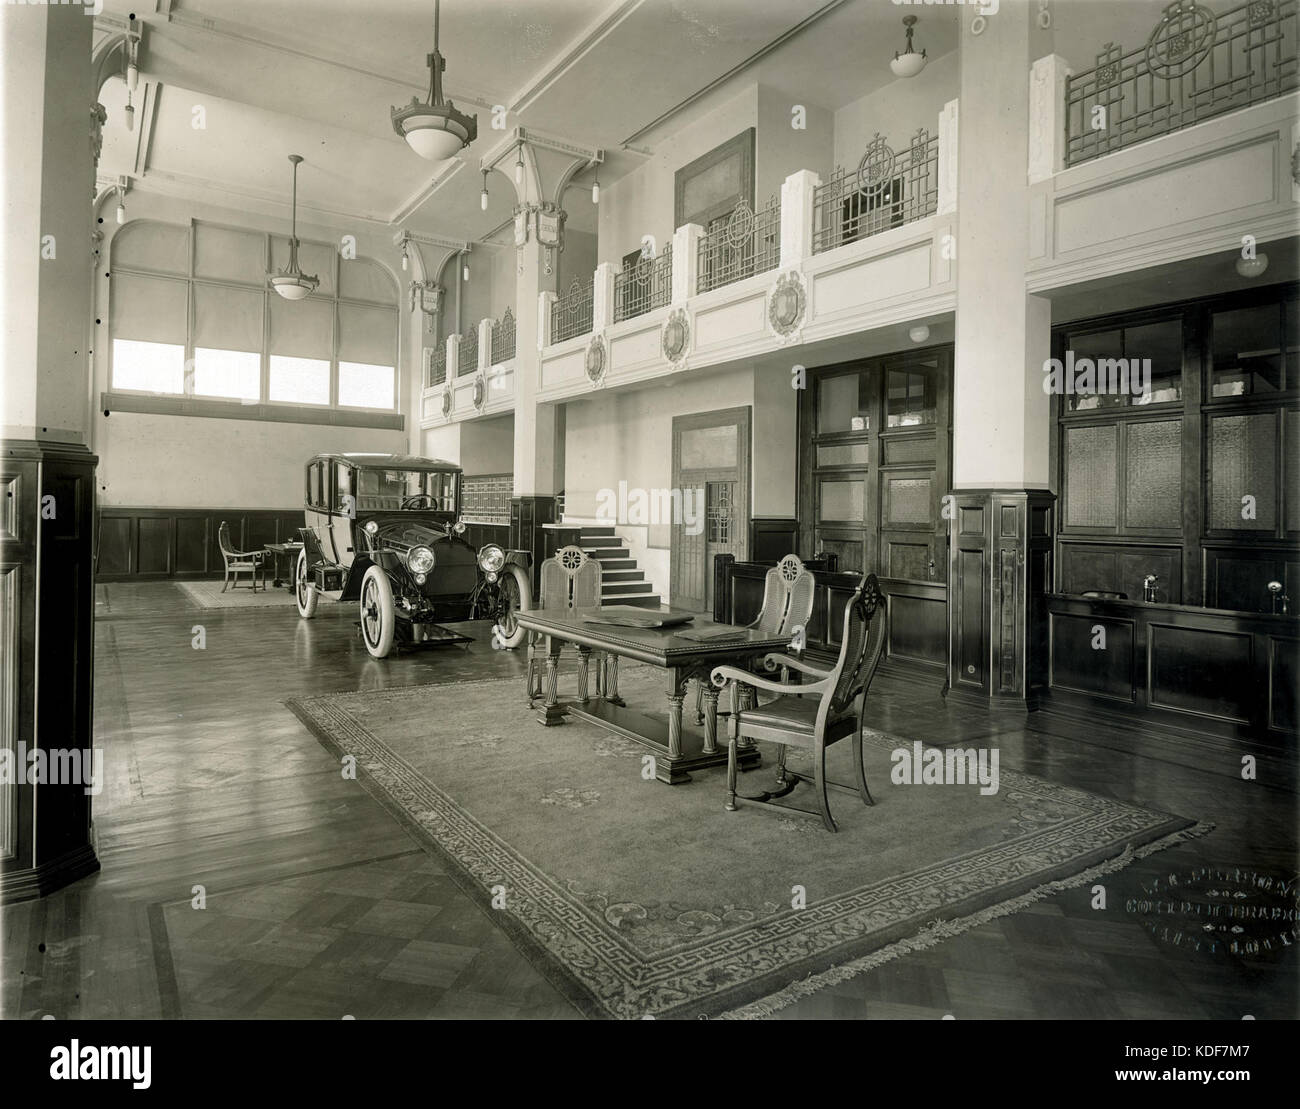 Packard Missouri Motor Company, 2201 Locust Street. Interior view of lobby with mezzanine, showing display automobile next to carpeted area with table and chairs Stock Photo